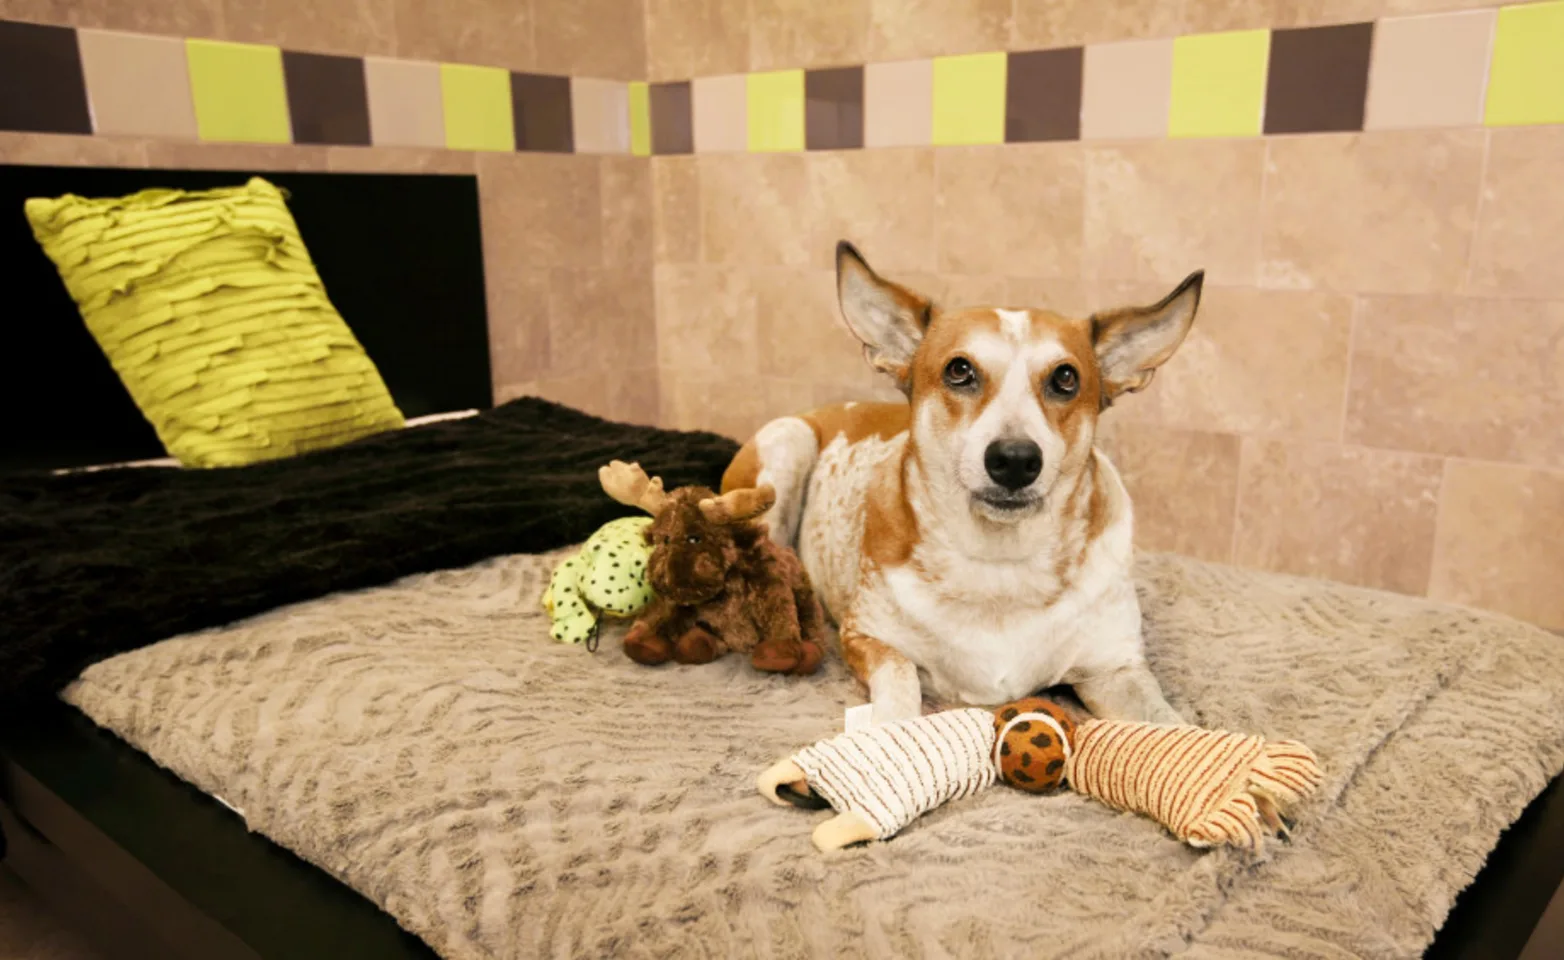 A Boarding Room Suite with a Brown/White Dog sitting on the bed with toys